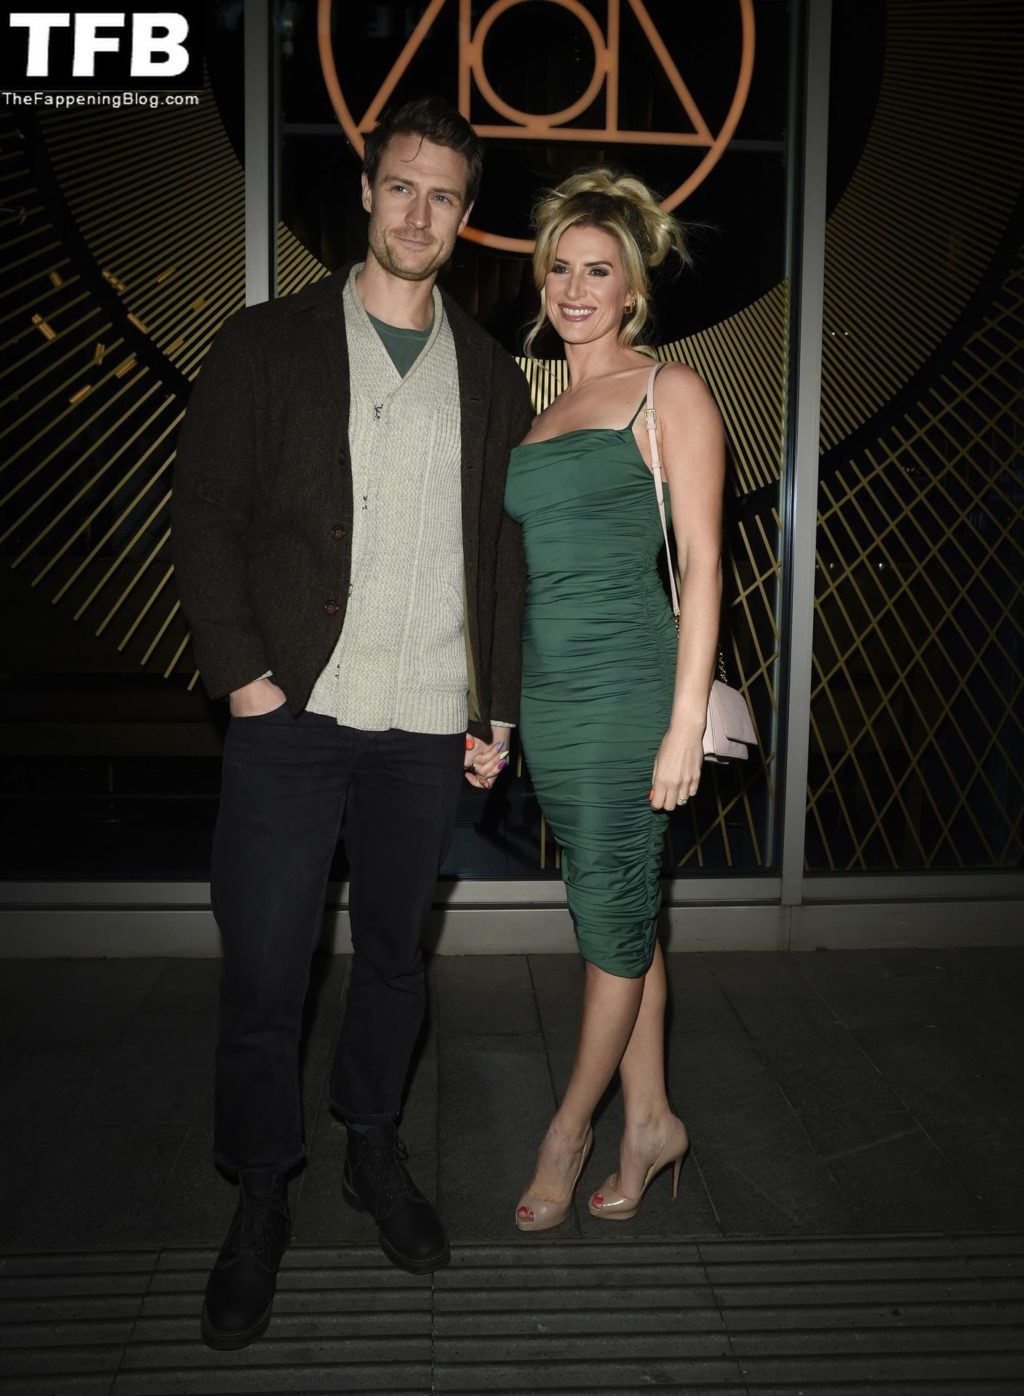 Sarah Jayne Dunn Sexy The Fappening Blog 11 1024x1396 - Sarah Jayne Dunn Looks Hot in a Green Dress Arriving at the Re-Launch of The Alchemist in Spinningfields (26 Photos)